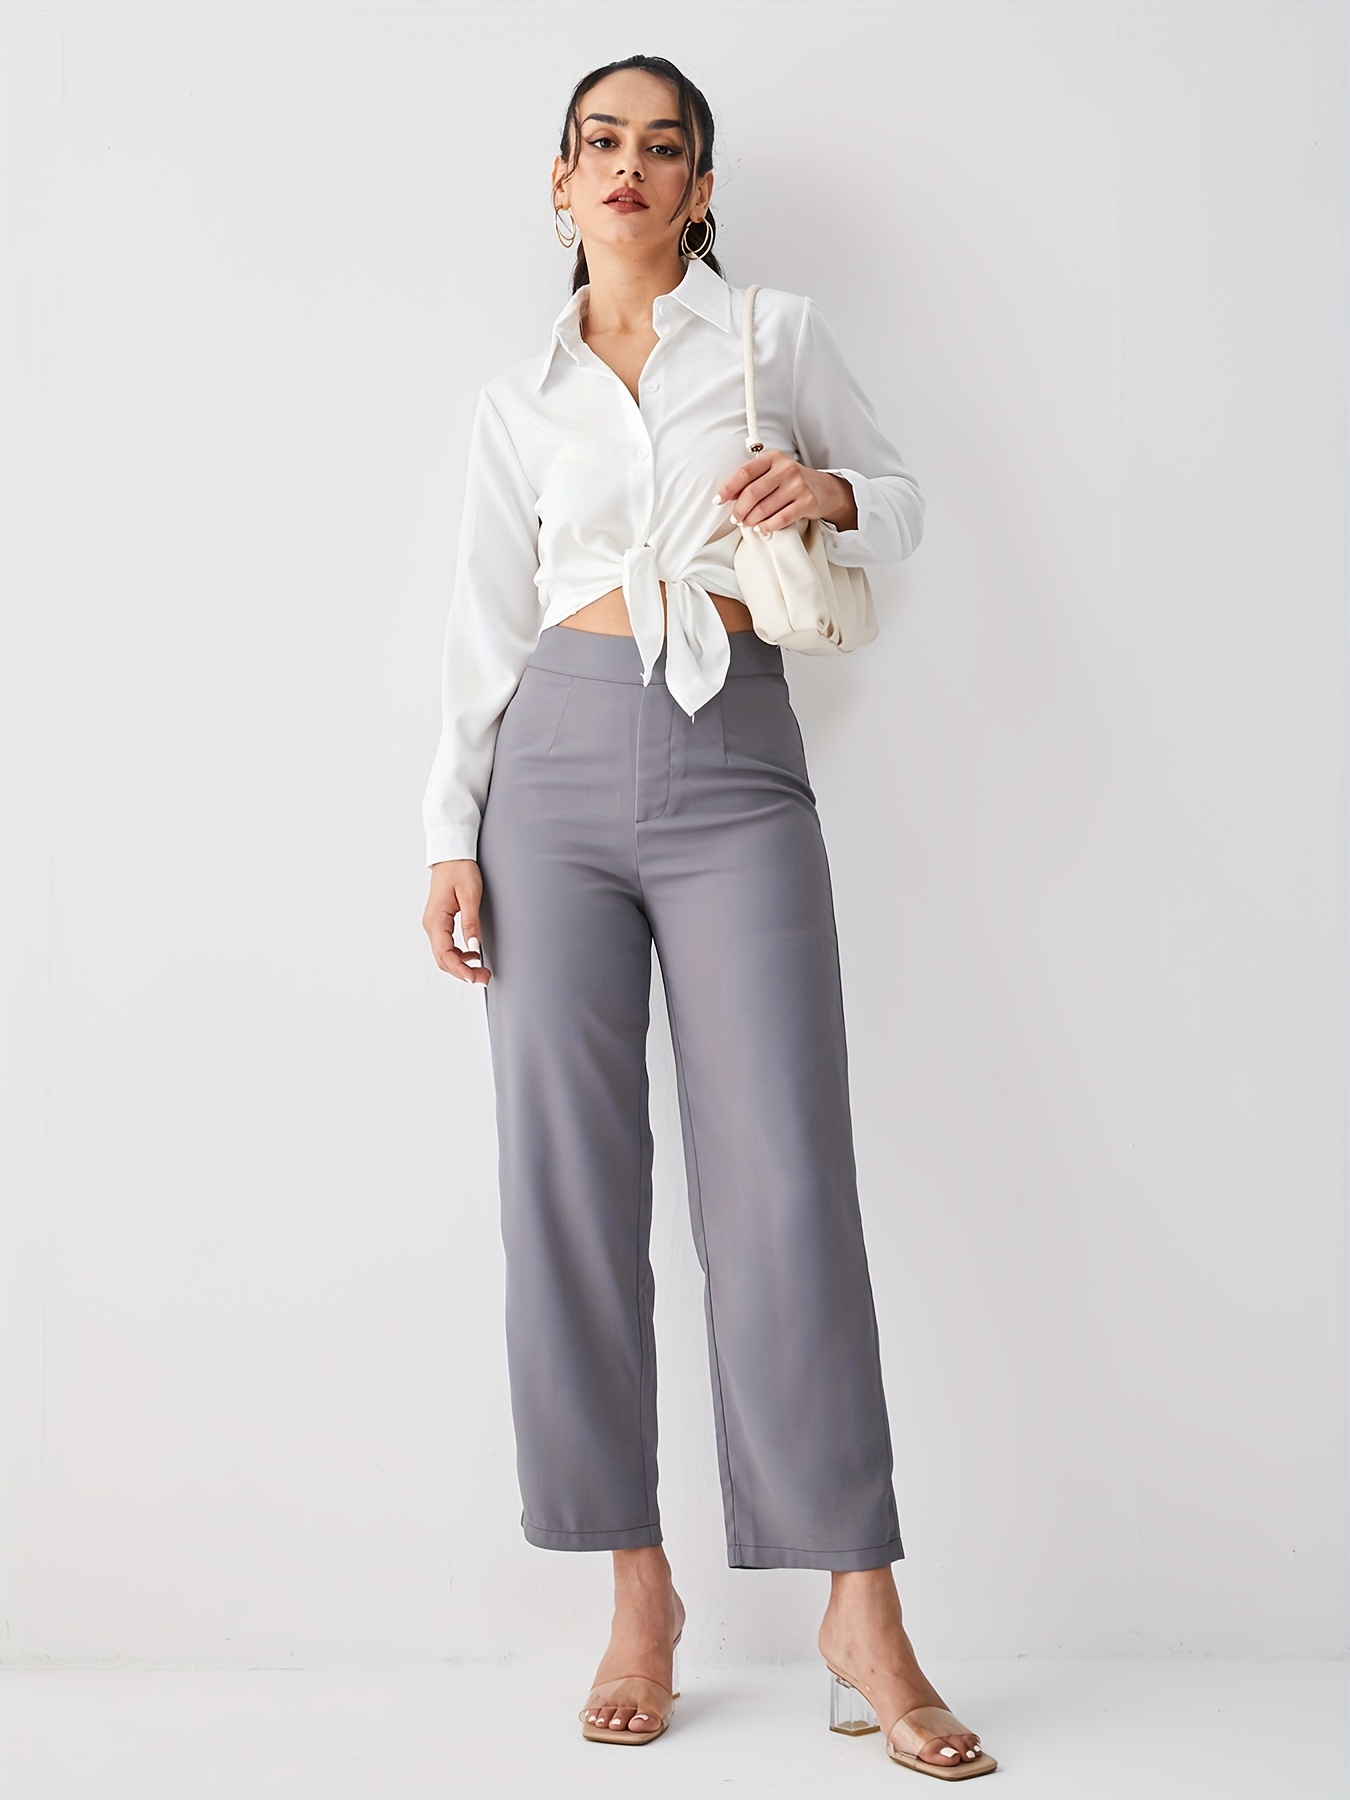 Office Pants Dress Trousers Straight Leg Casual Work Business